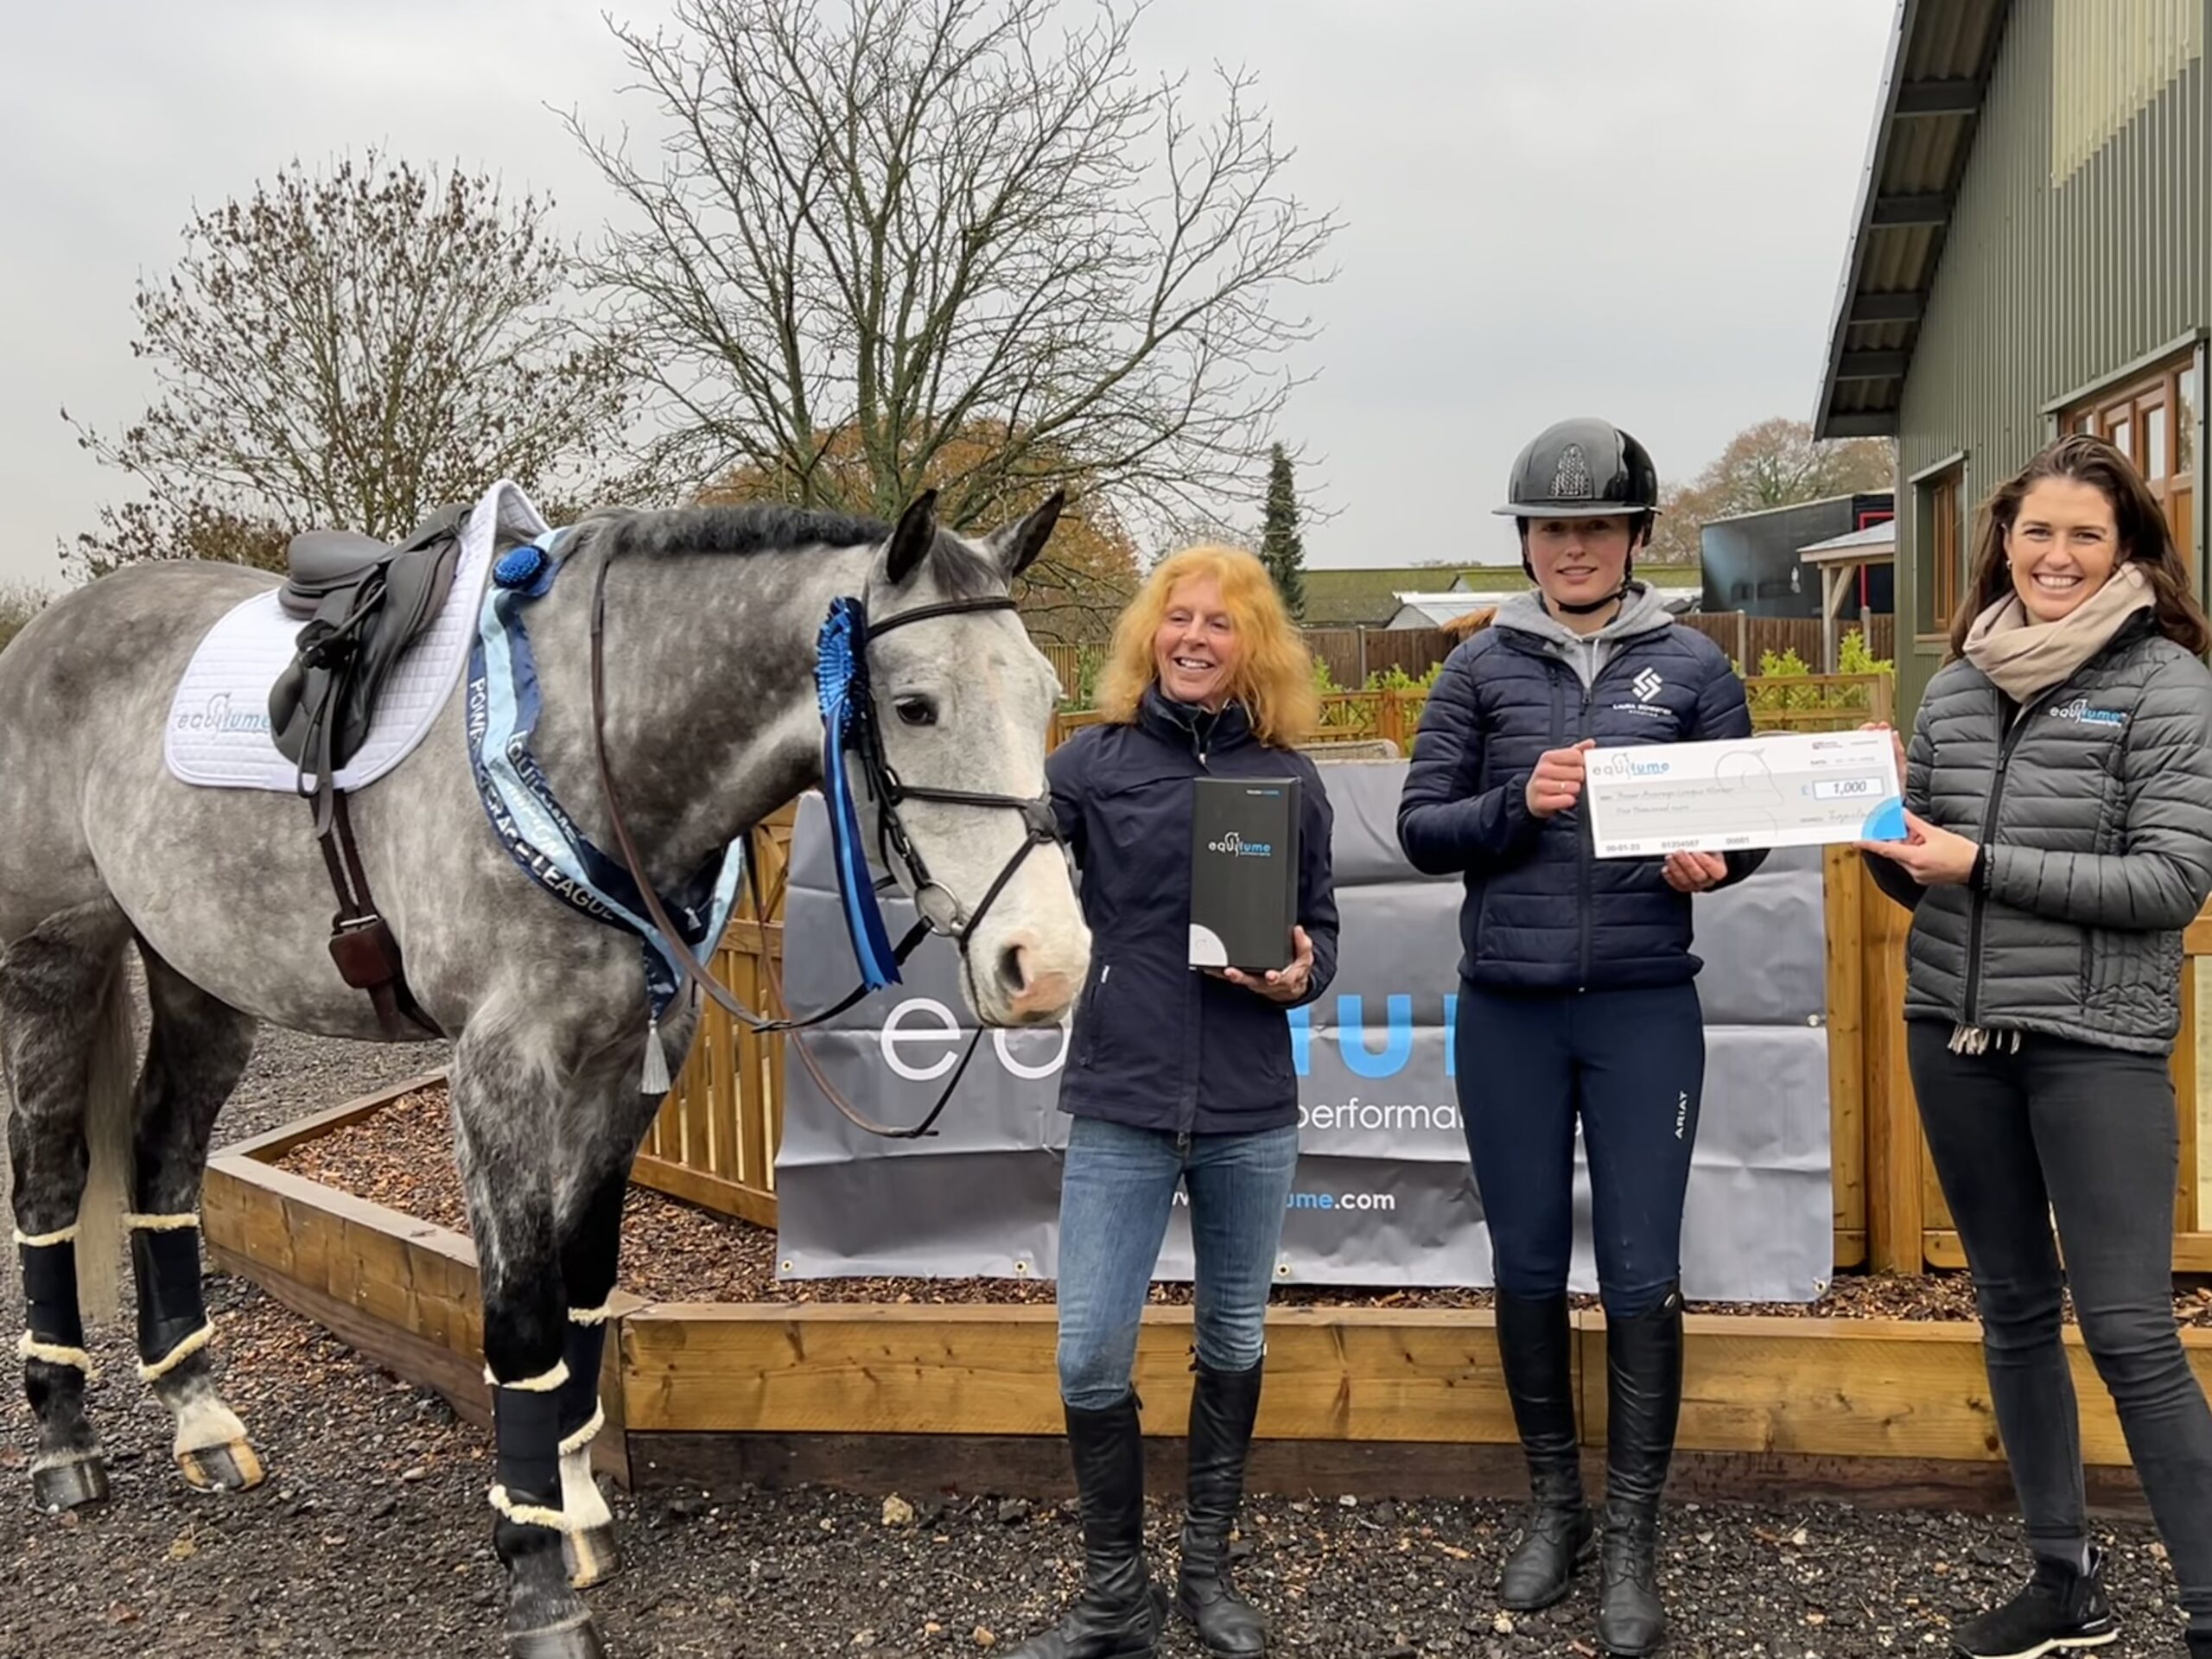 Grey horse wearing a saddle and bridle and his prize of a sash and a rosette on his head. Standing beside his owner Katie, rider Laura and Equilume marketing manager Alyssa O'Neill